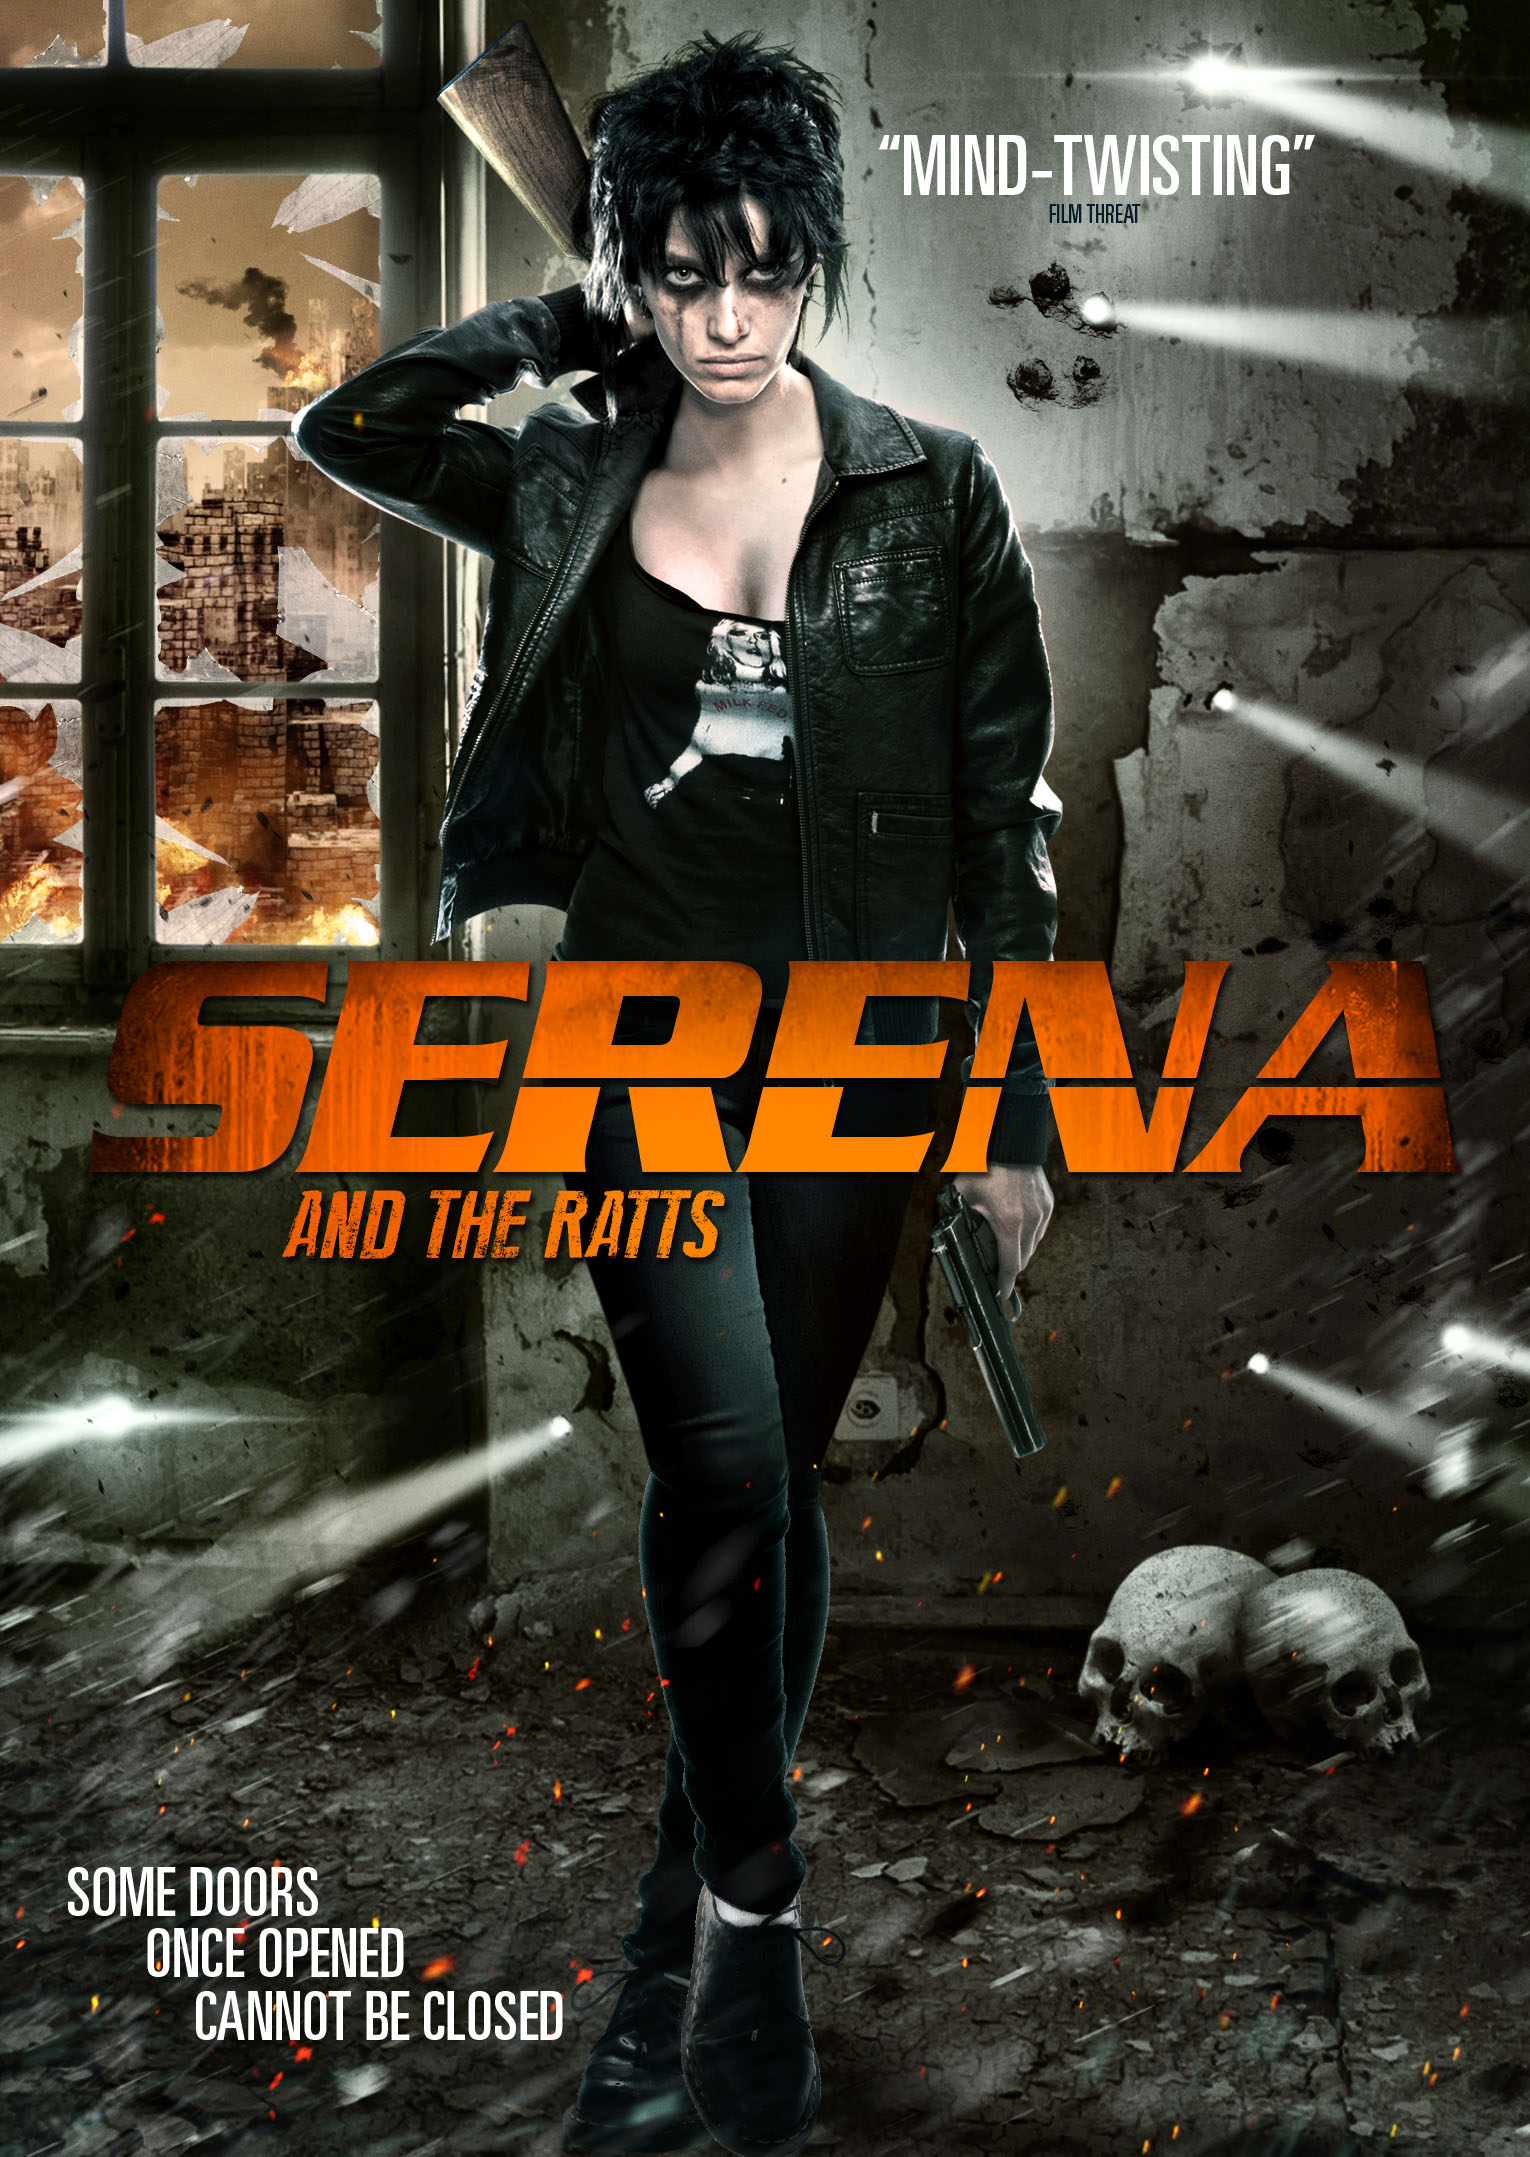 Serena and the Ratts (2012) on DVD 2